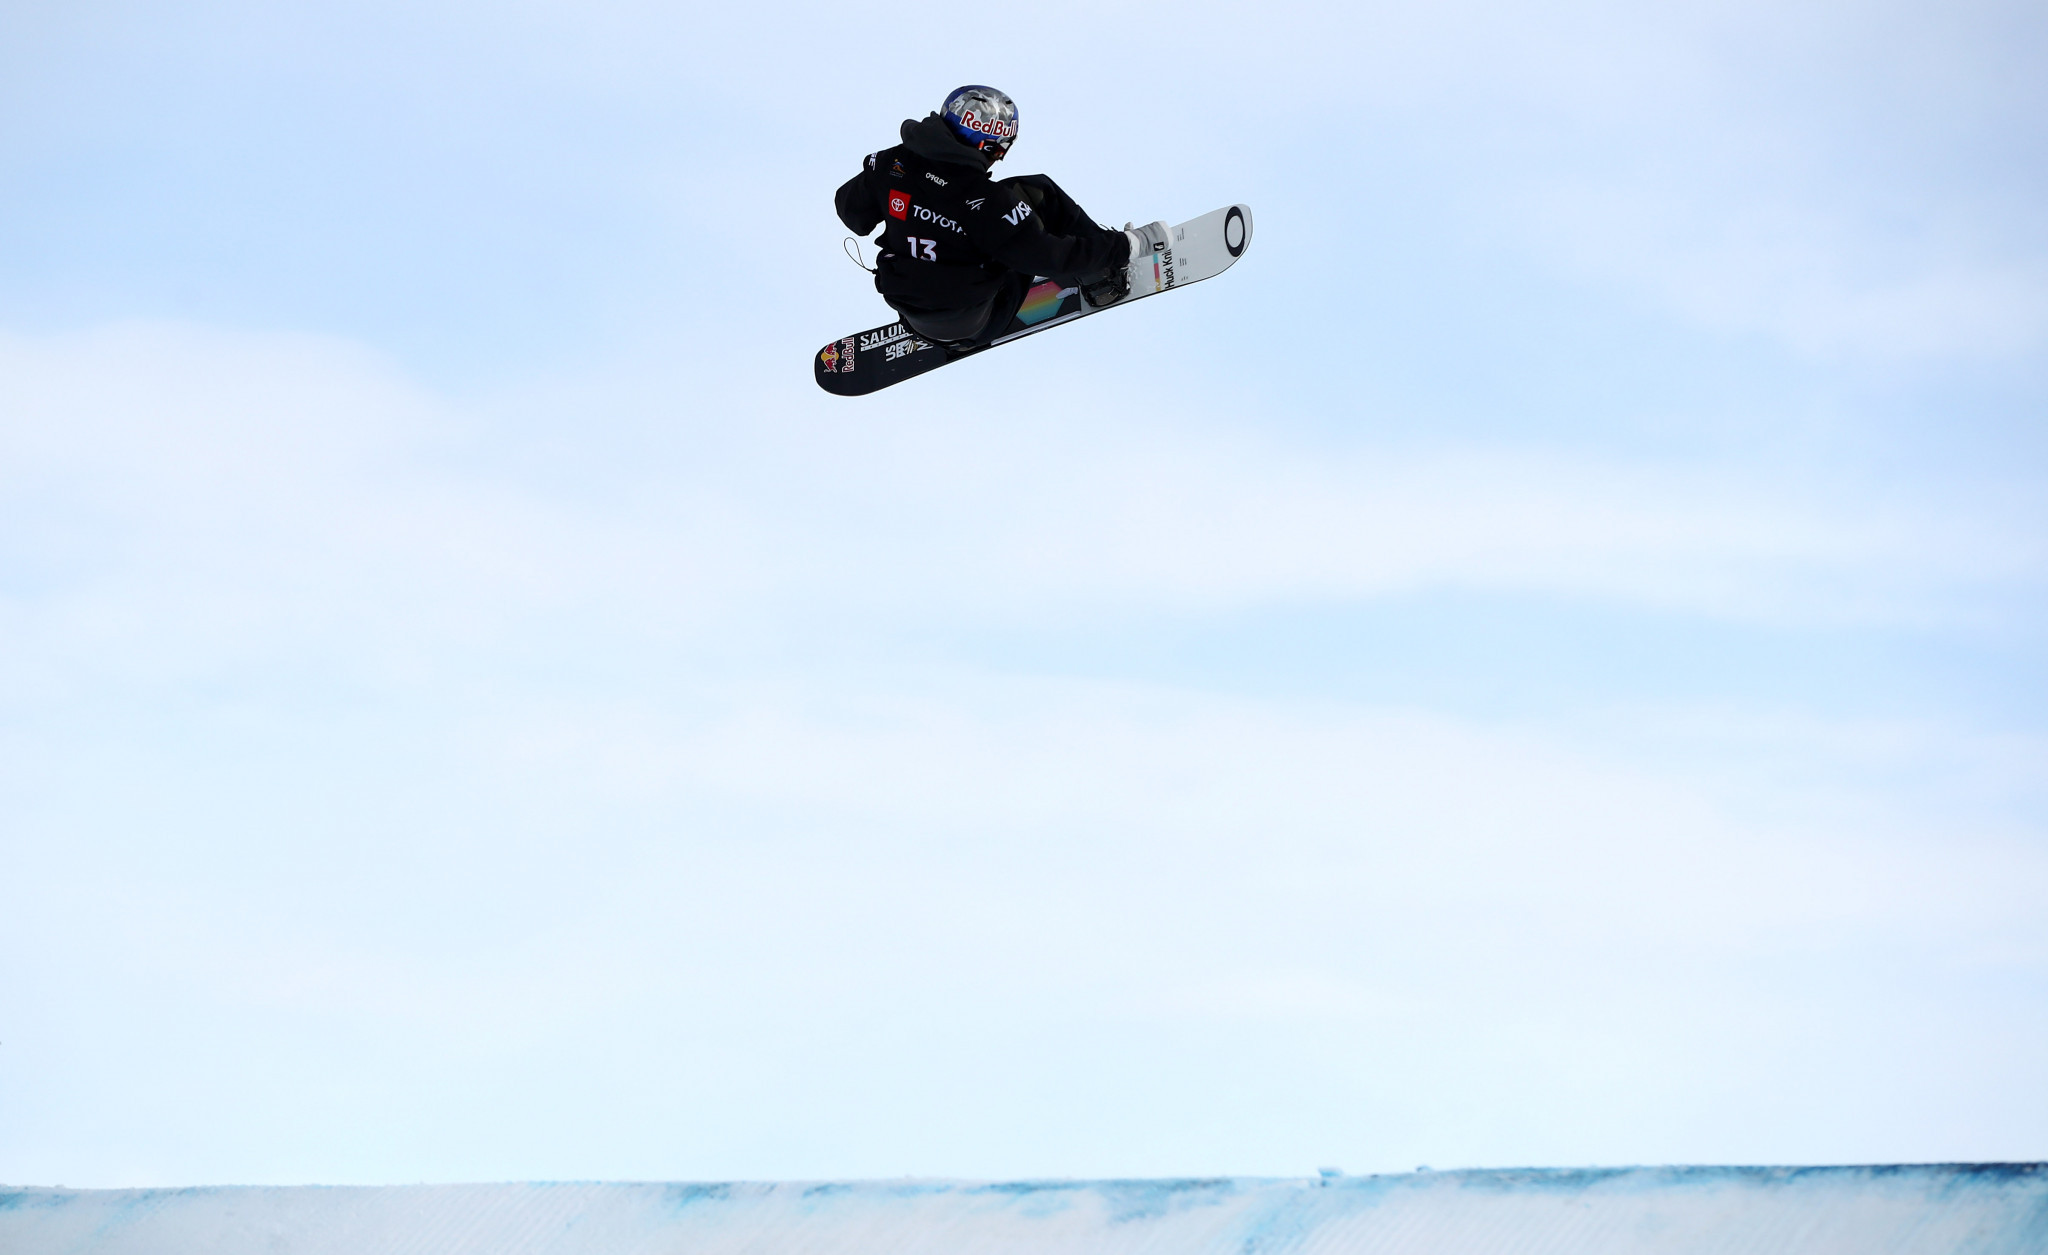 Judd Henkes had topped the men's slopestyle qualifiers ©Getty Images